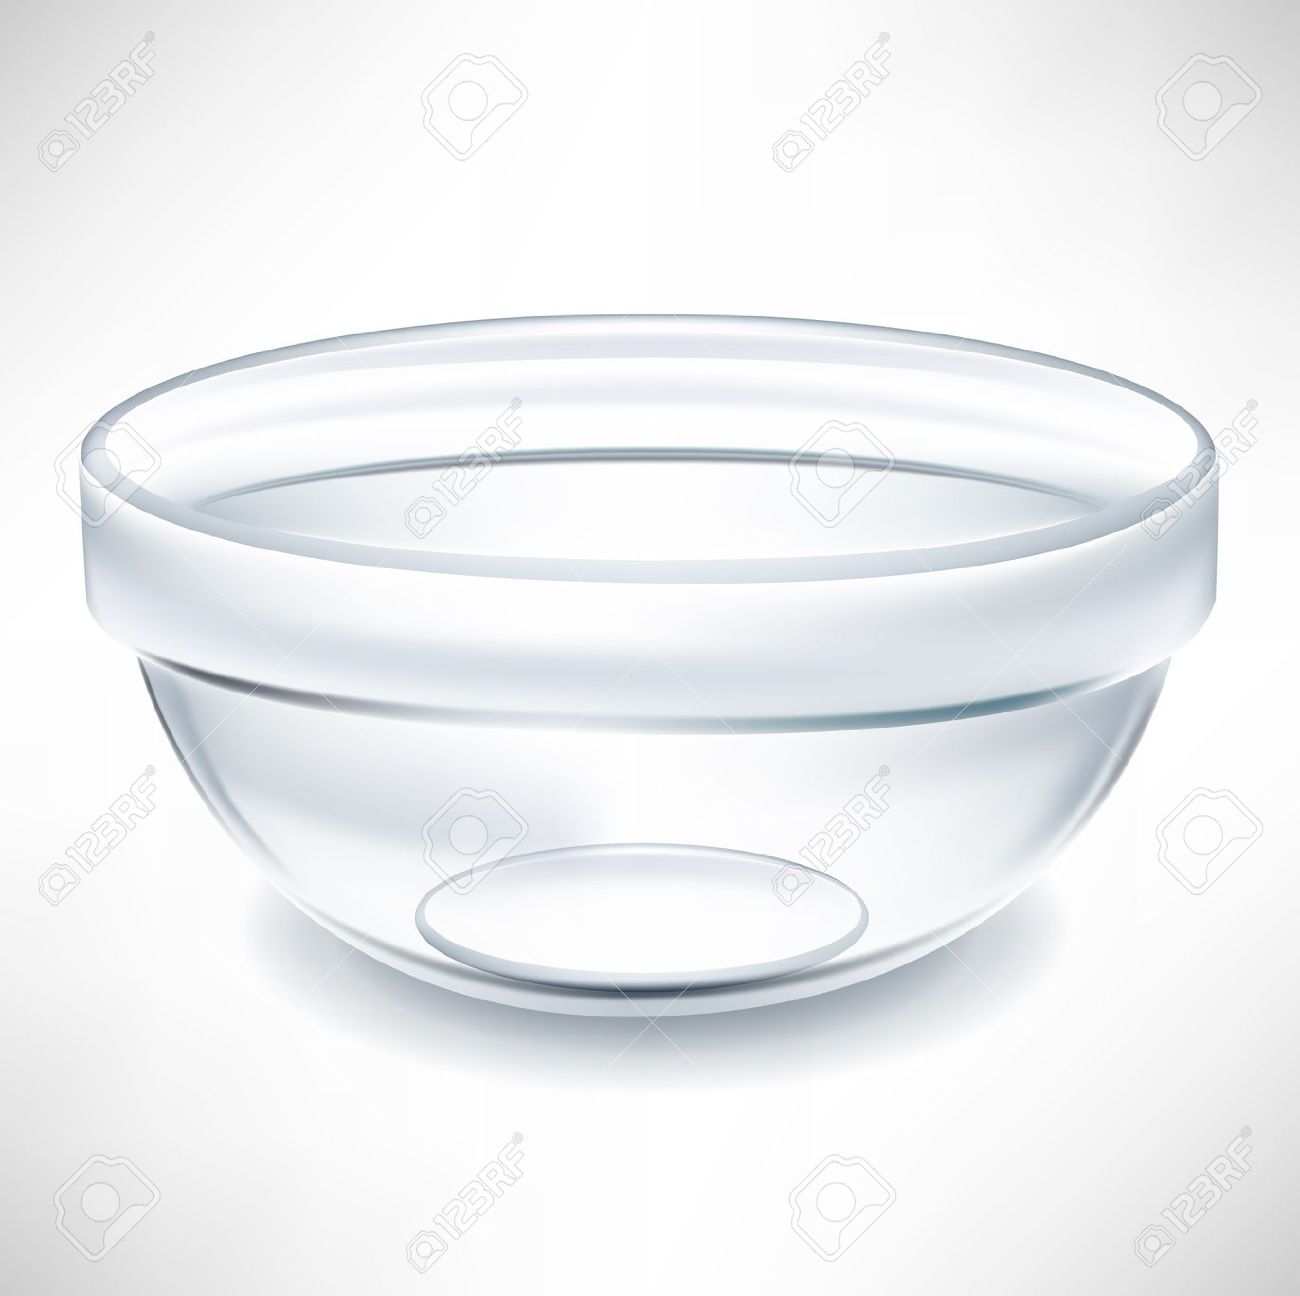 Clipart of crystal bowls transparent background.